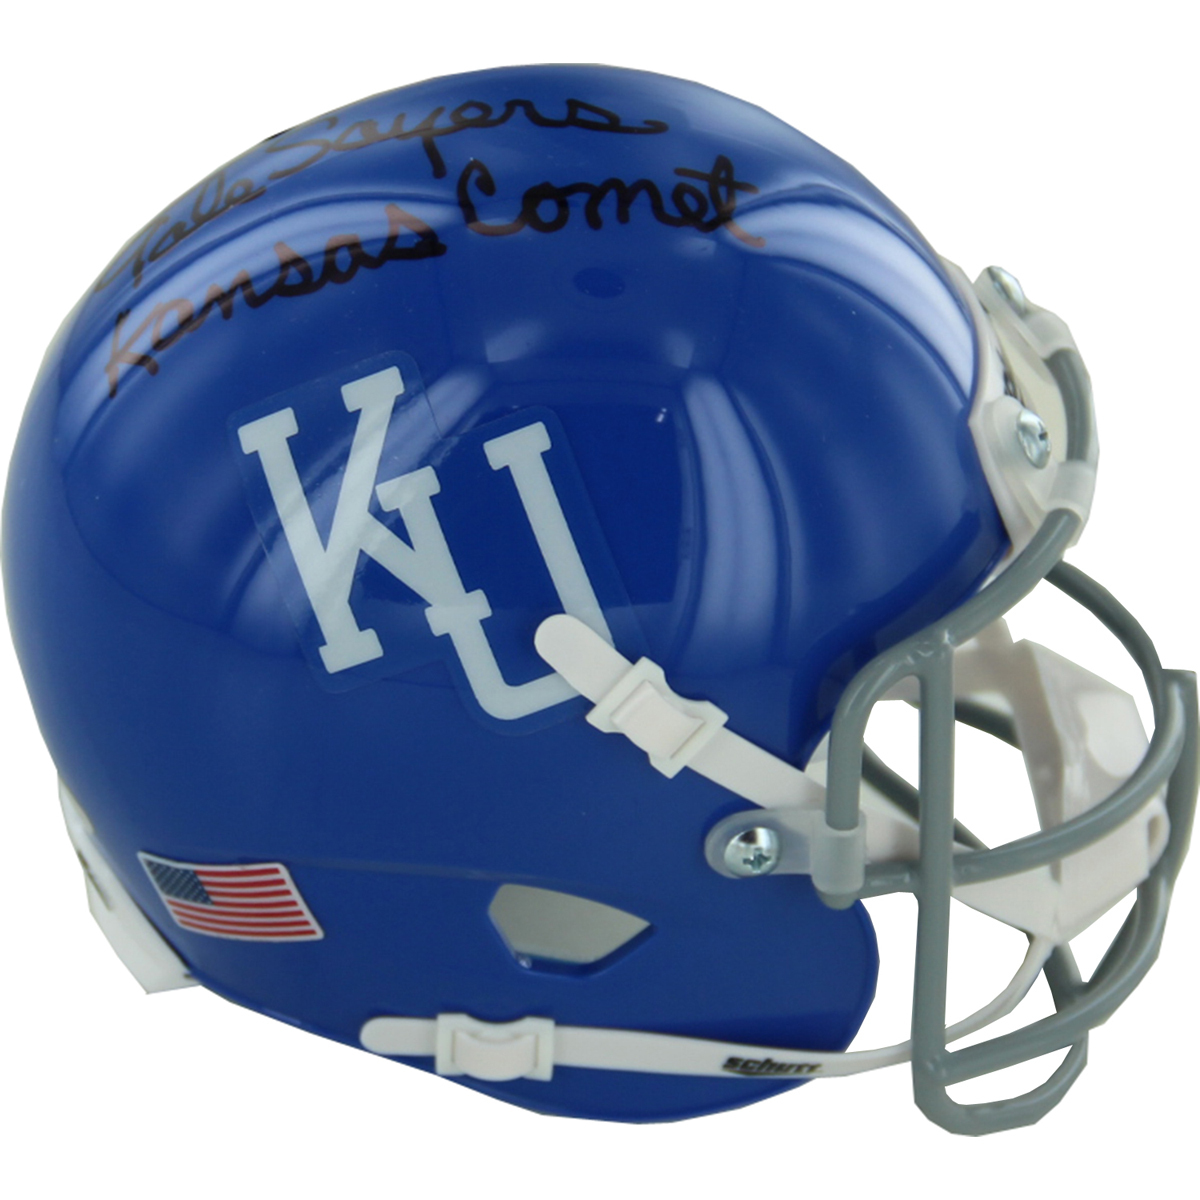 Steiner Sports sells this autographed and inscribed Gayle Sayers University of Kansas helmet here. Photo courtesy of Steiner Sports.